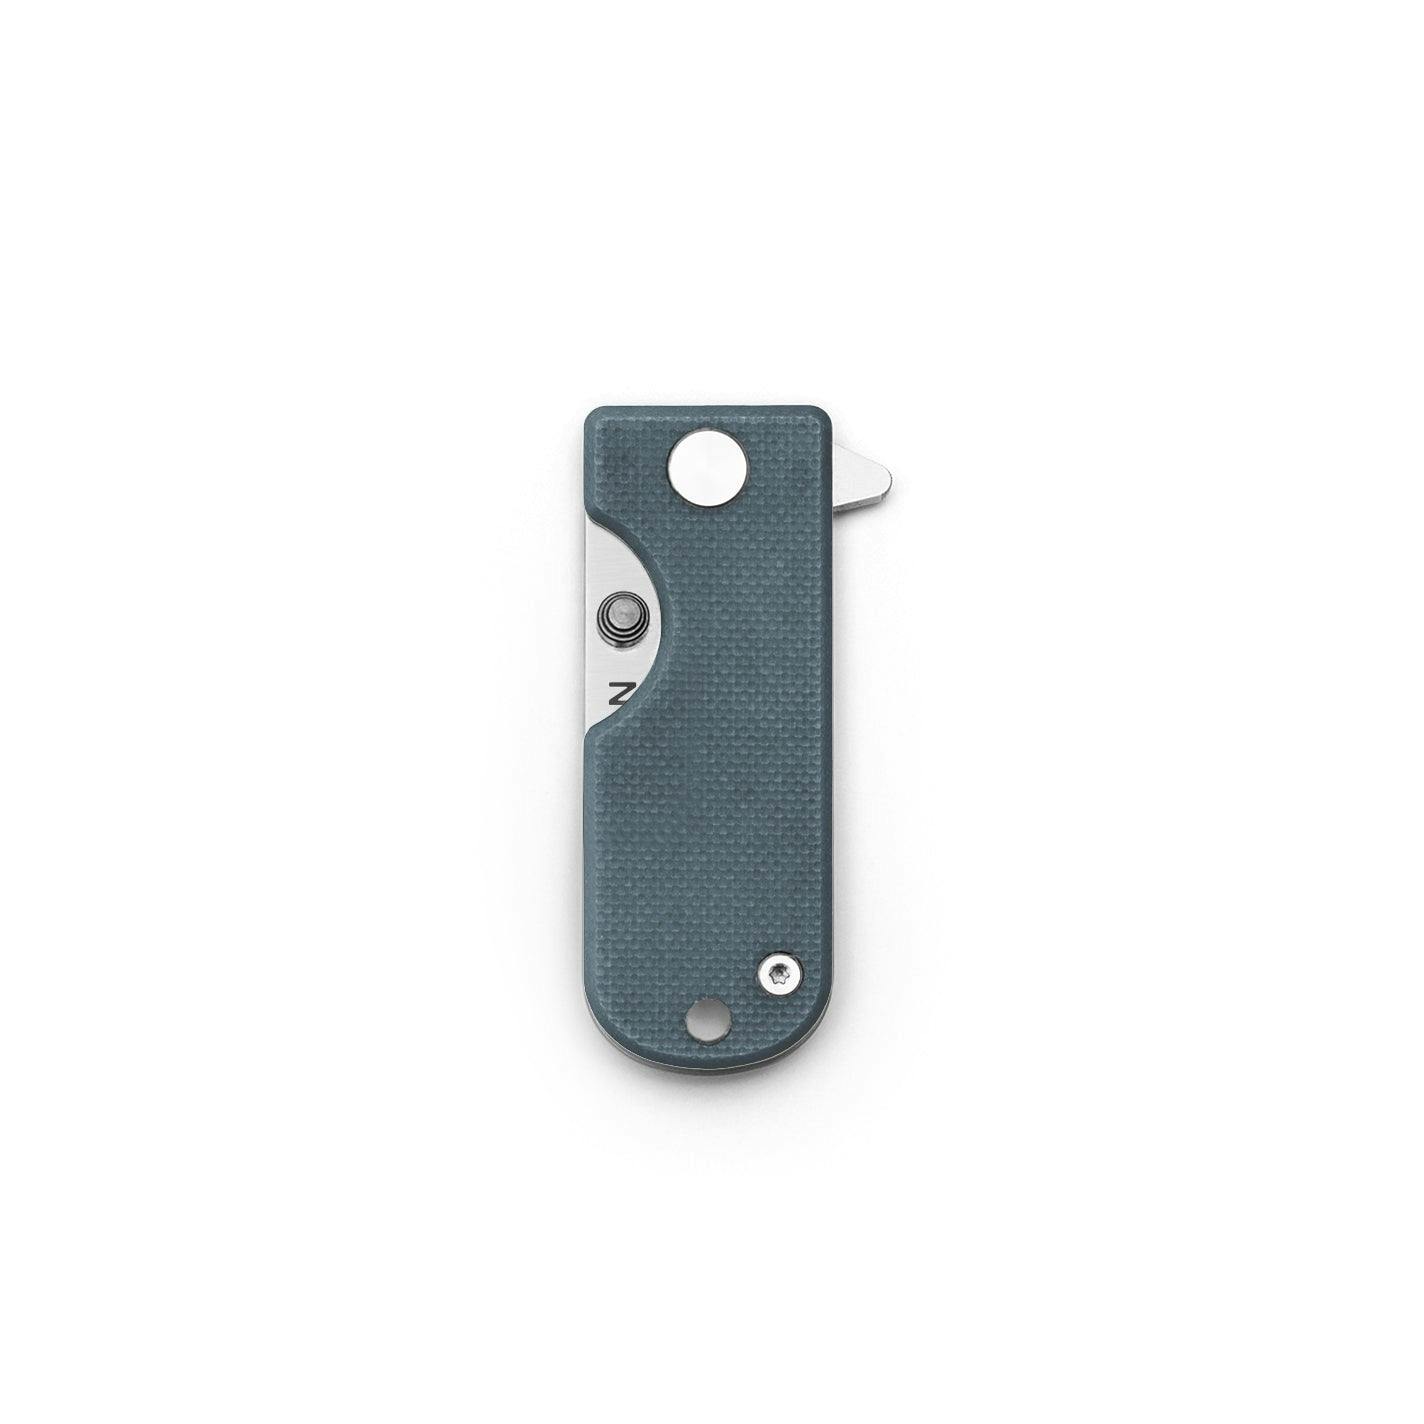 Microblade folded pocket knife in all blue